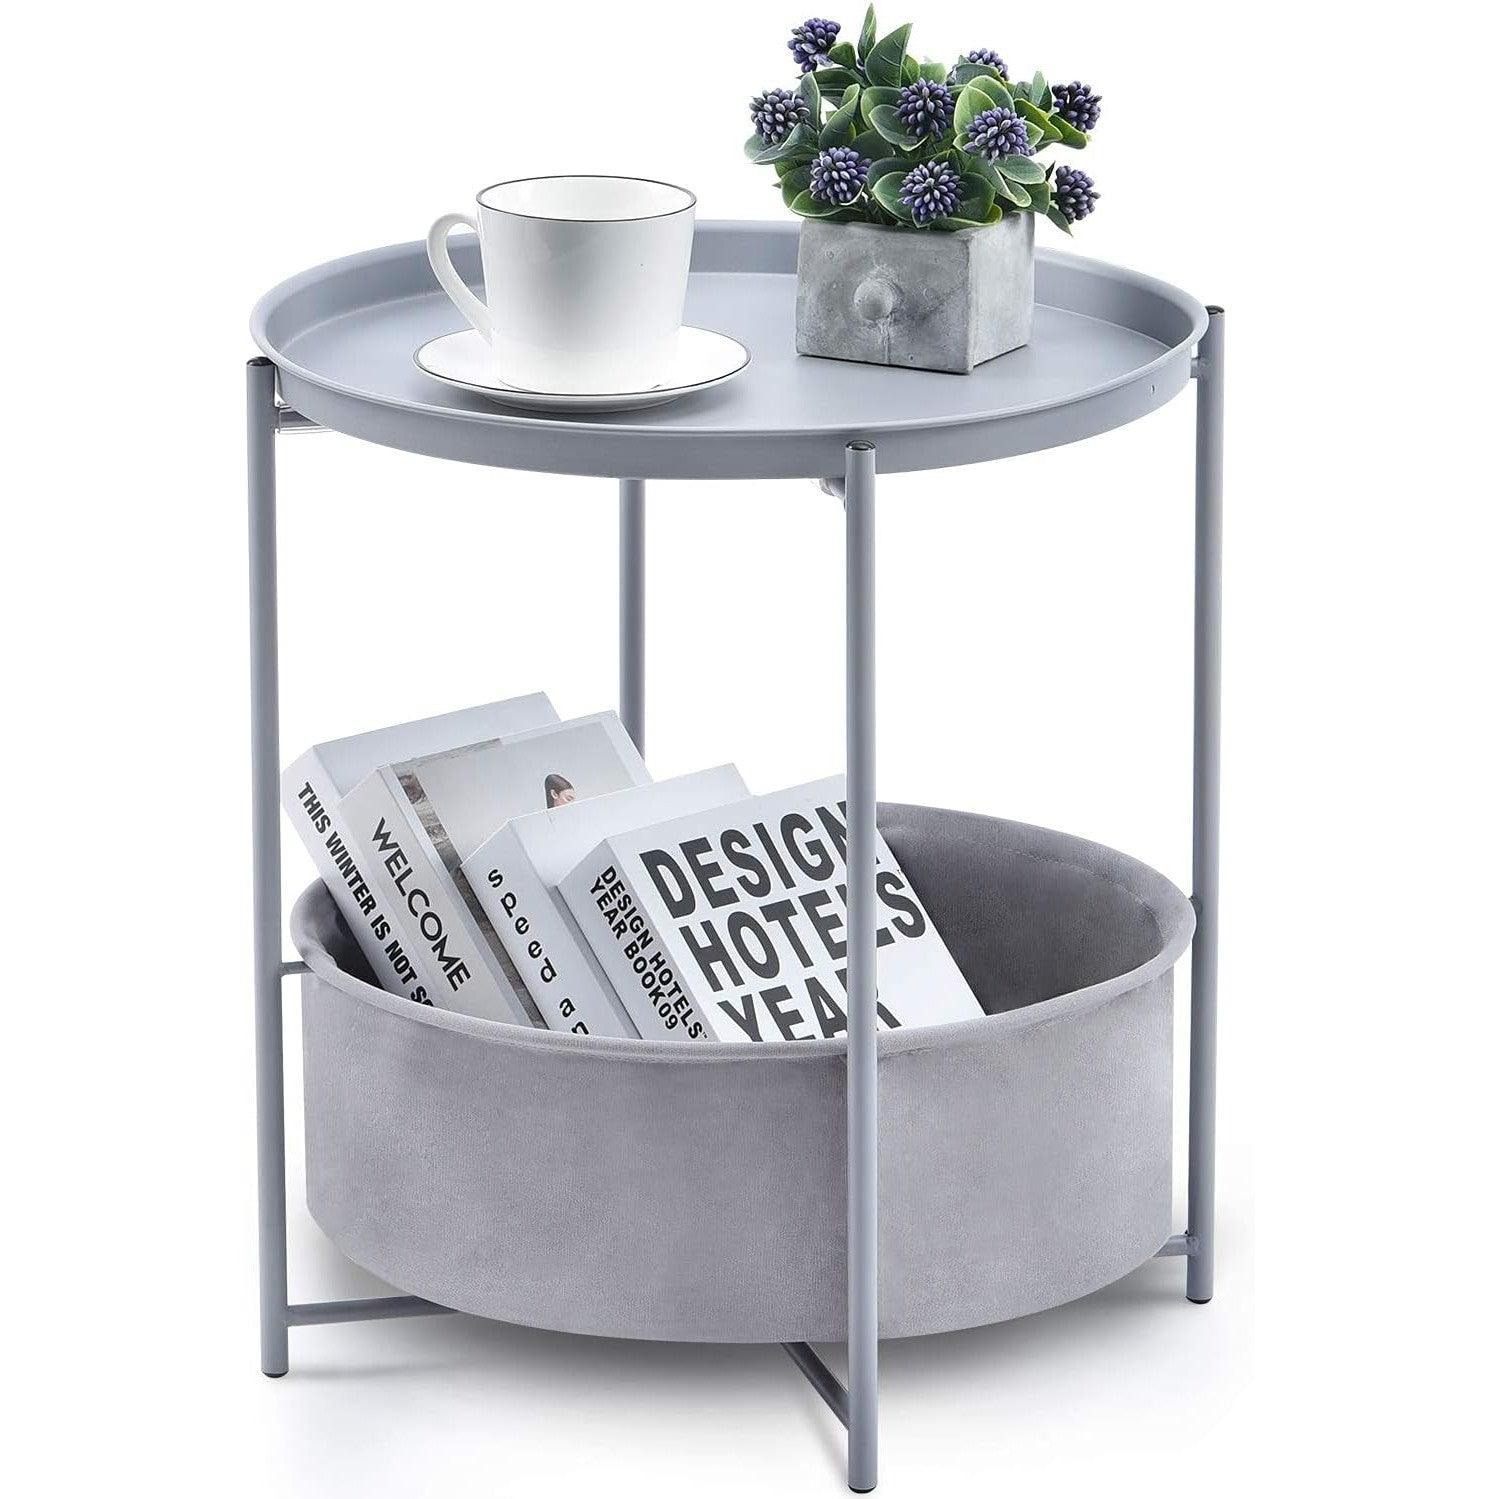 KINGRACK Round Coffee Table - Grey with Basket and Detachable Tray - Massive Discounts